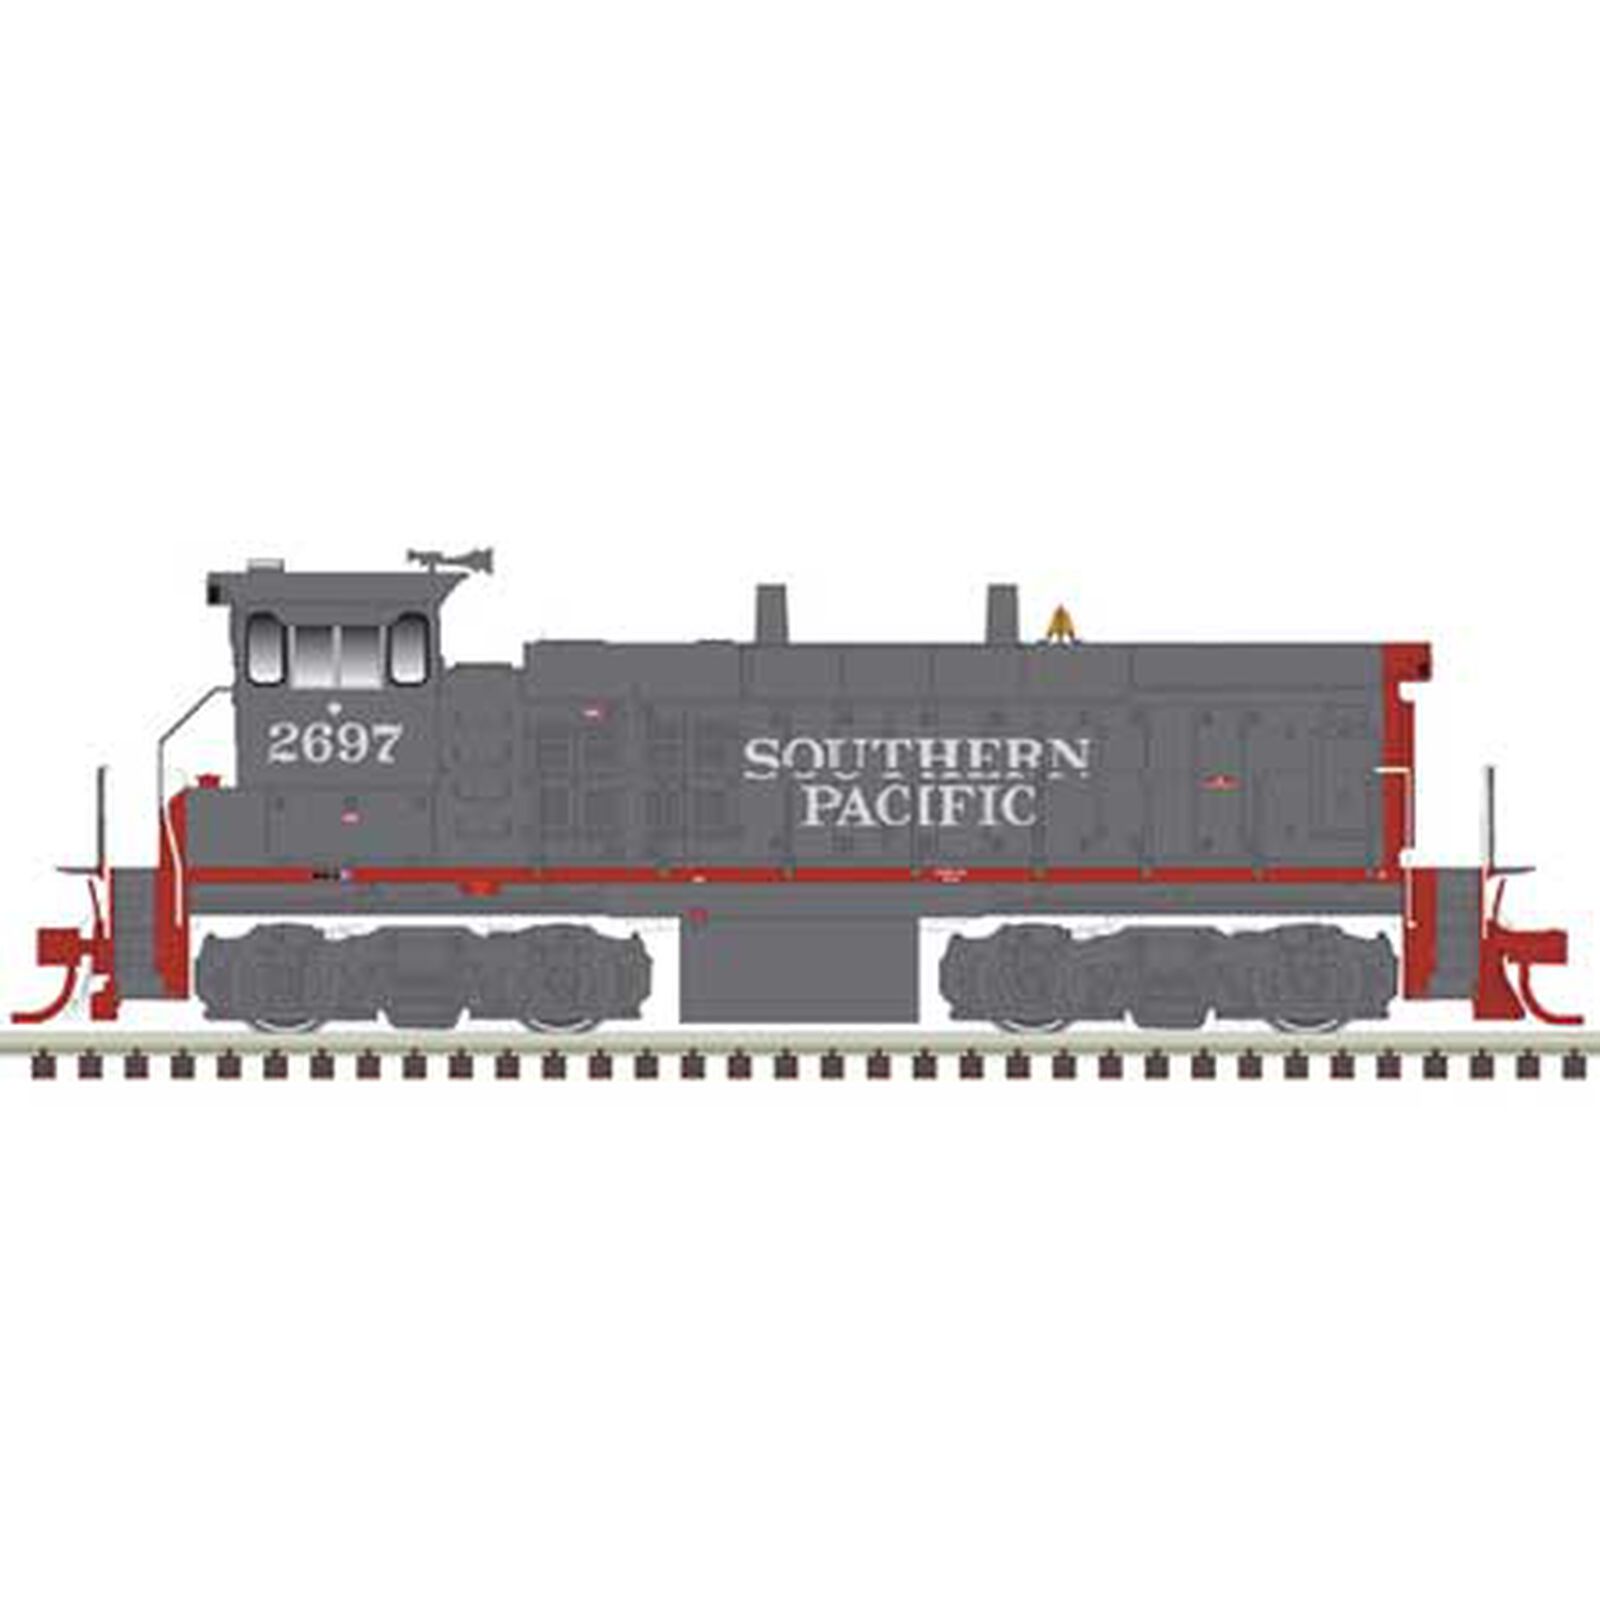 Southern Pacific 2697 (Gray/Scarlet)